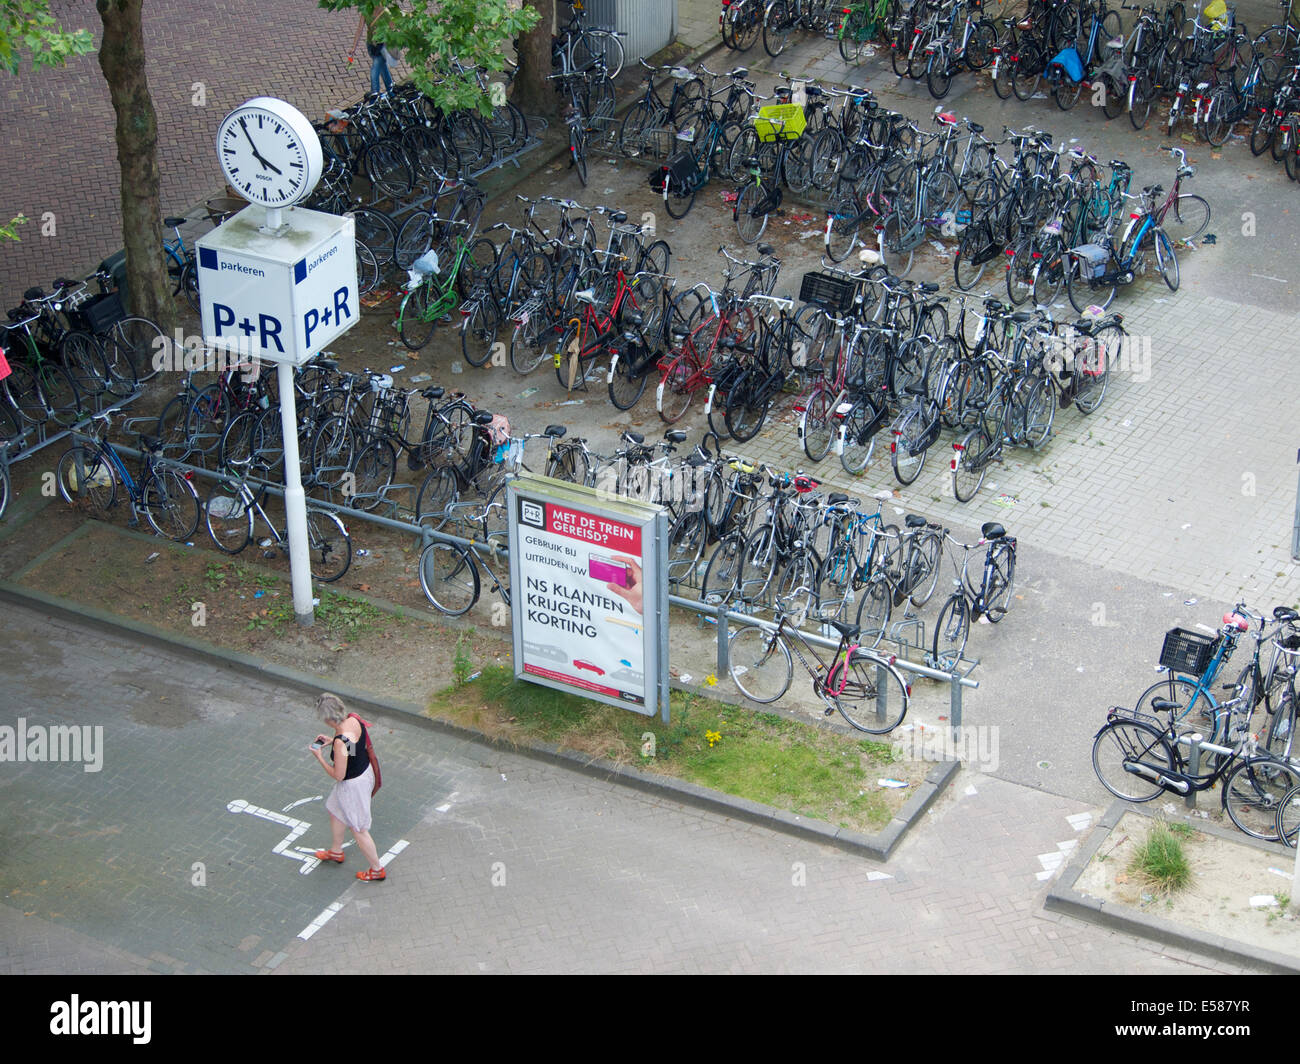 Bicycle parking area at Breda train station with woman looking at her smartphone. Breda, the Netherlands. Stock Photo